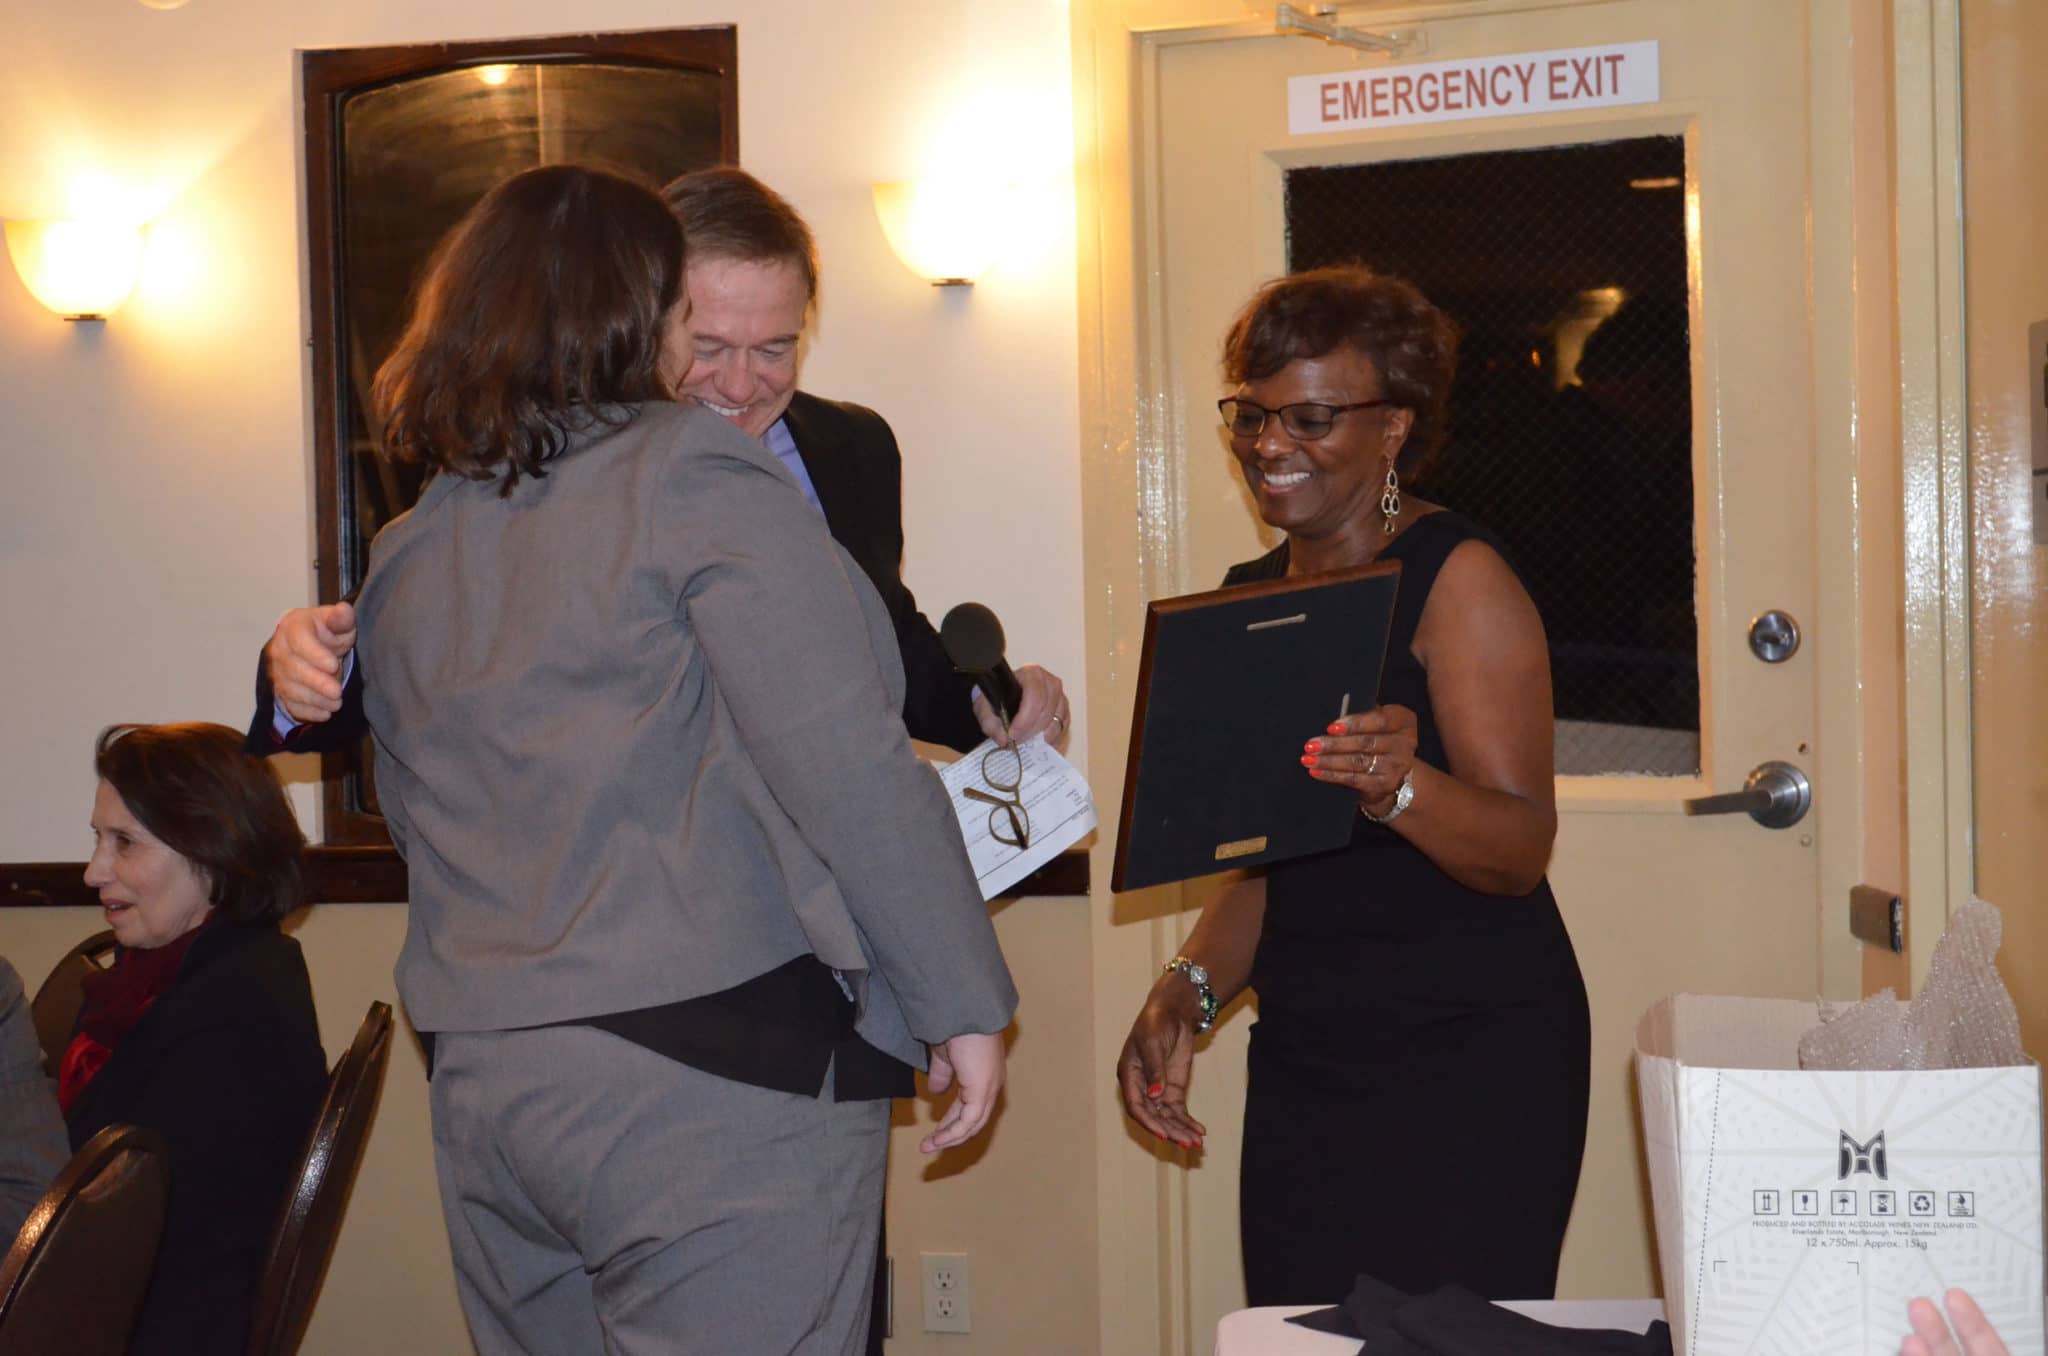 On September 24-27, 2017 Community Options hosted its 11th Annual iMatter Conference A Meaningful Life: Conference on Supported Employment at the Francis Marion Hotel in Charleston, SC. Awards Dinner cruise on Tuesday, September 26th aboard the Spirit of the Lowcountry on the Charleston, SC Harbor.